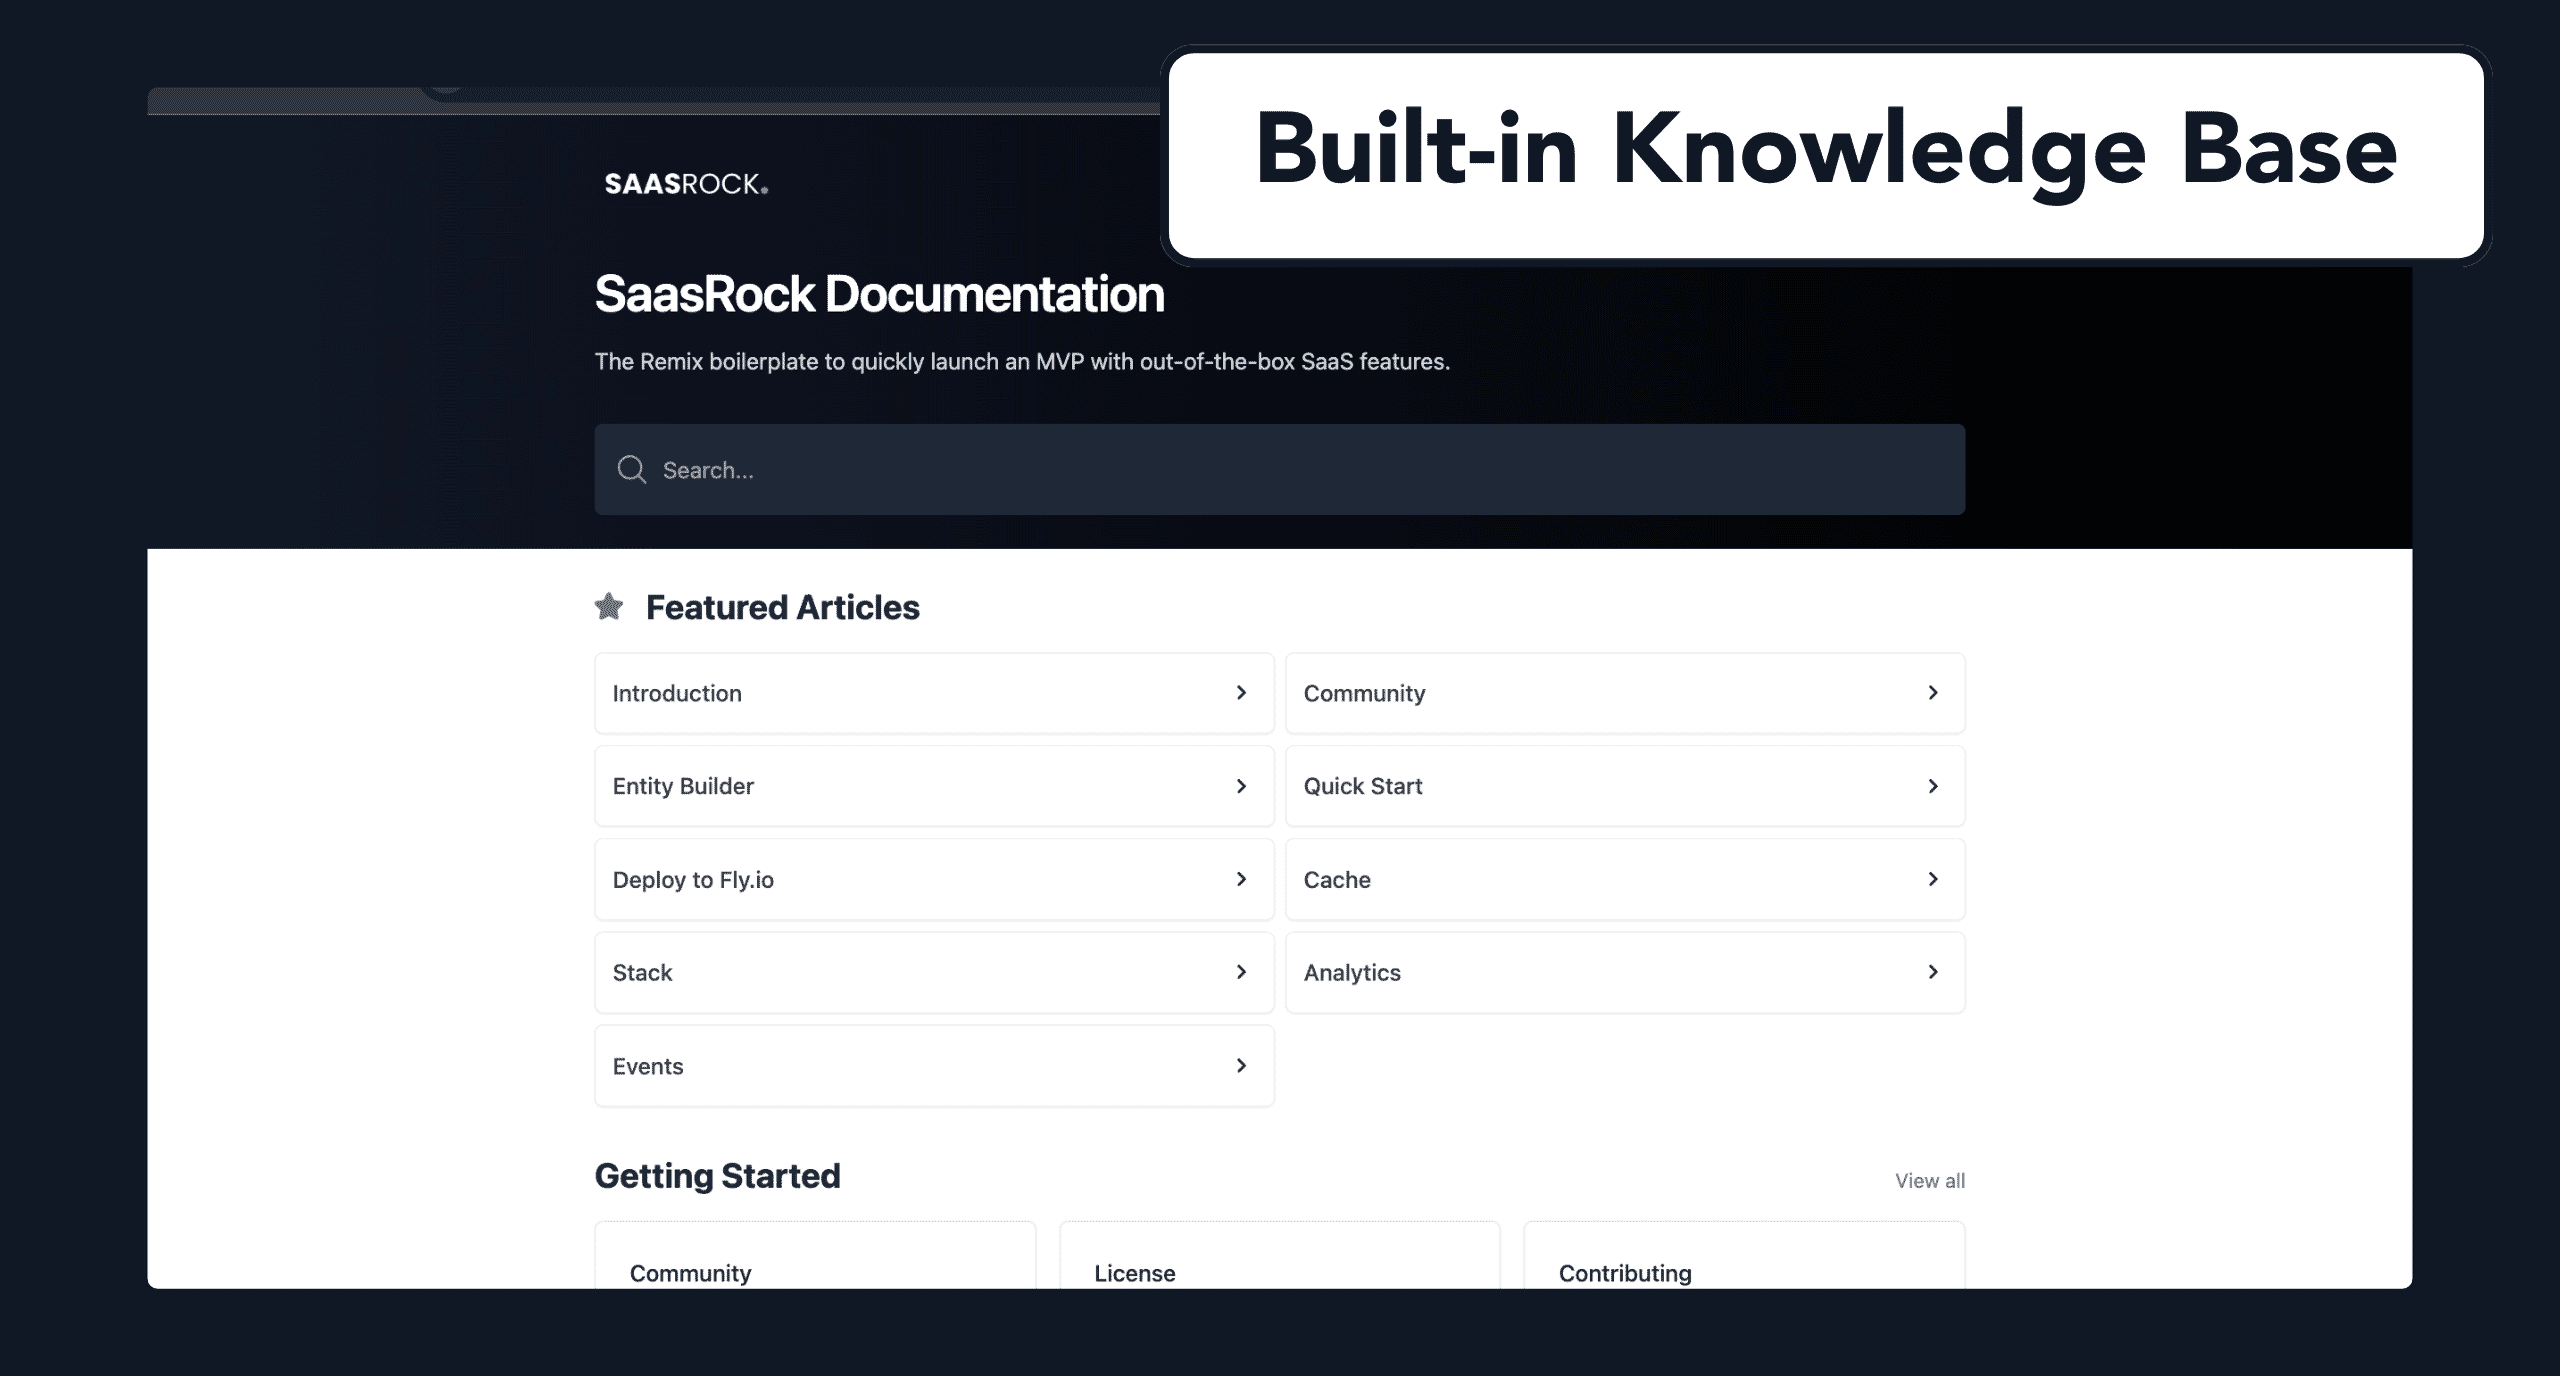 Build-in Knowledge Base